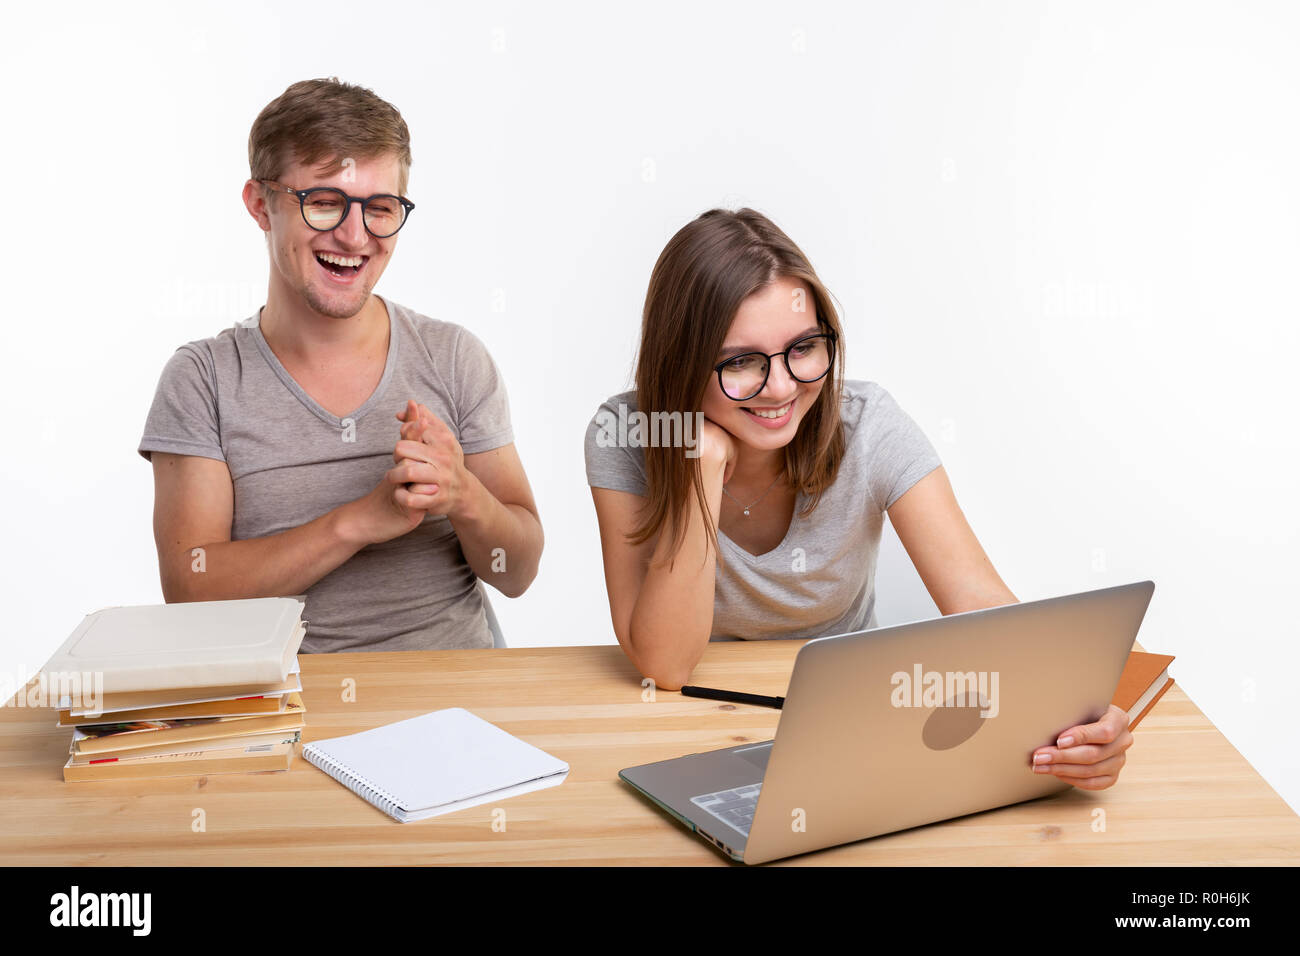 People and education concept - Two laughing students sitting at a table Stock Photo